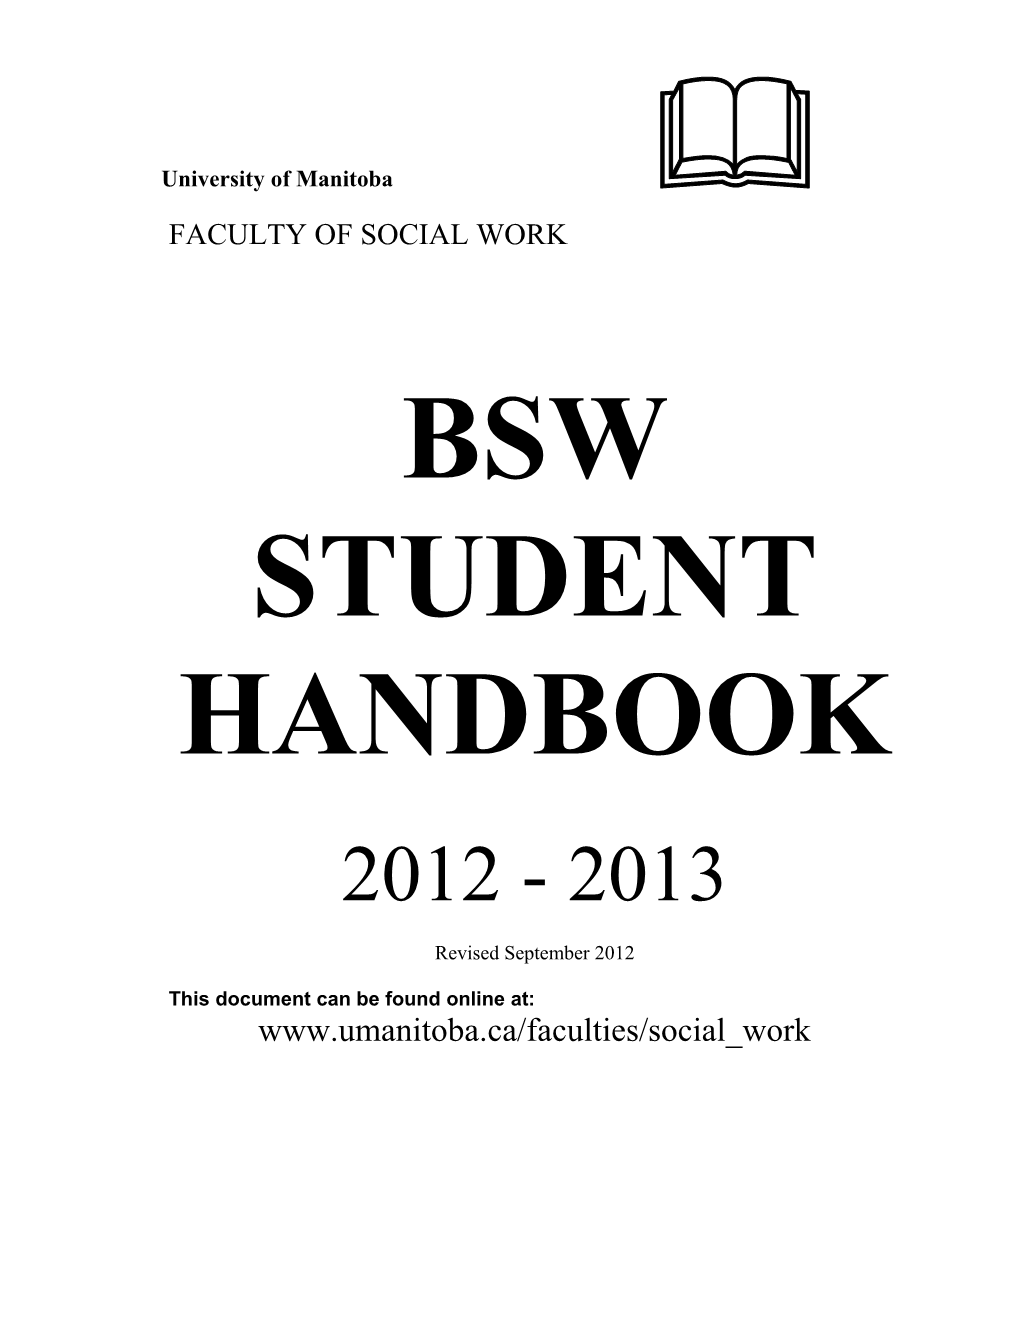 Faculty of Social Work Mission Statement